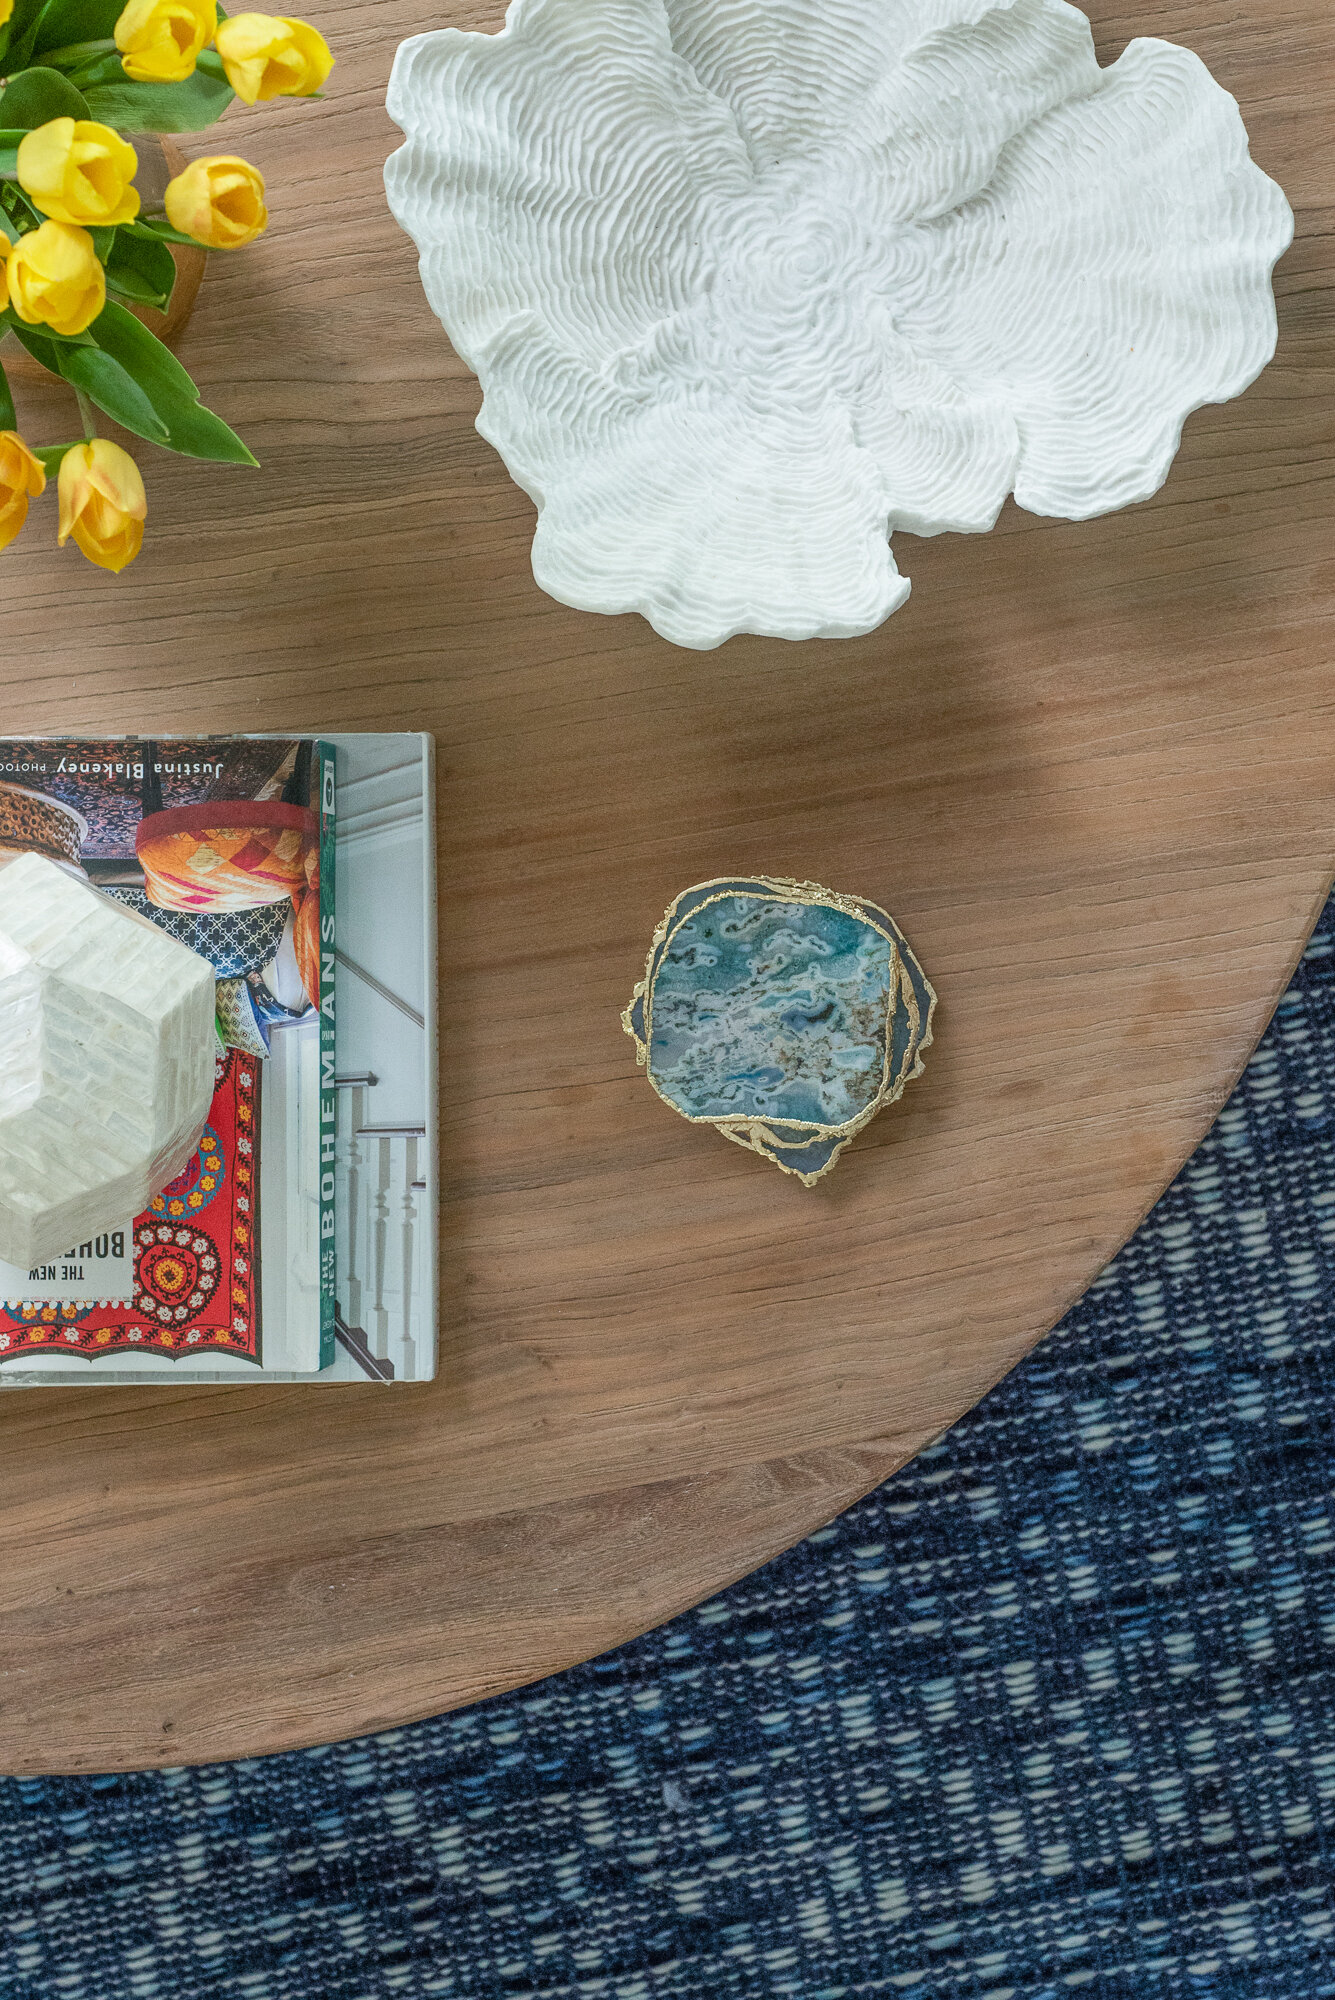 Coffee table details with coasters, white and yellow flowers and blue pattern rug